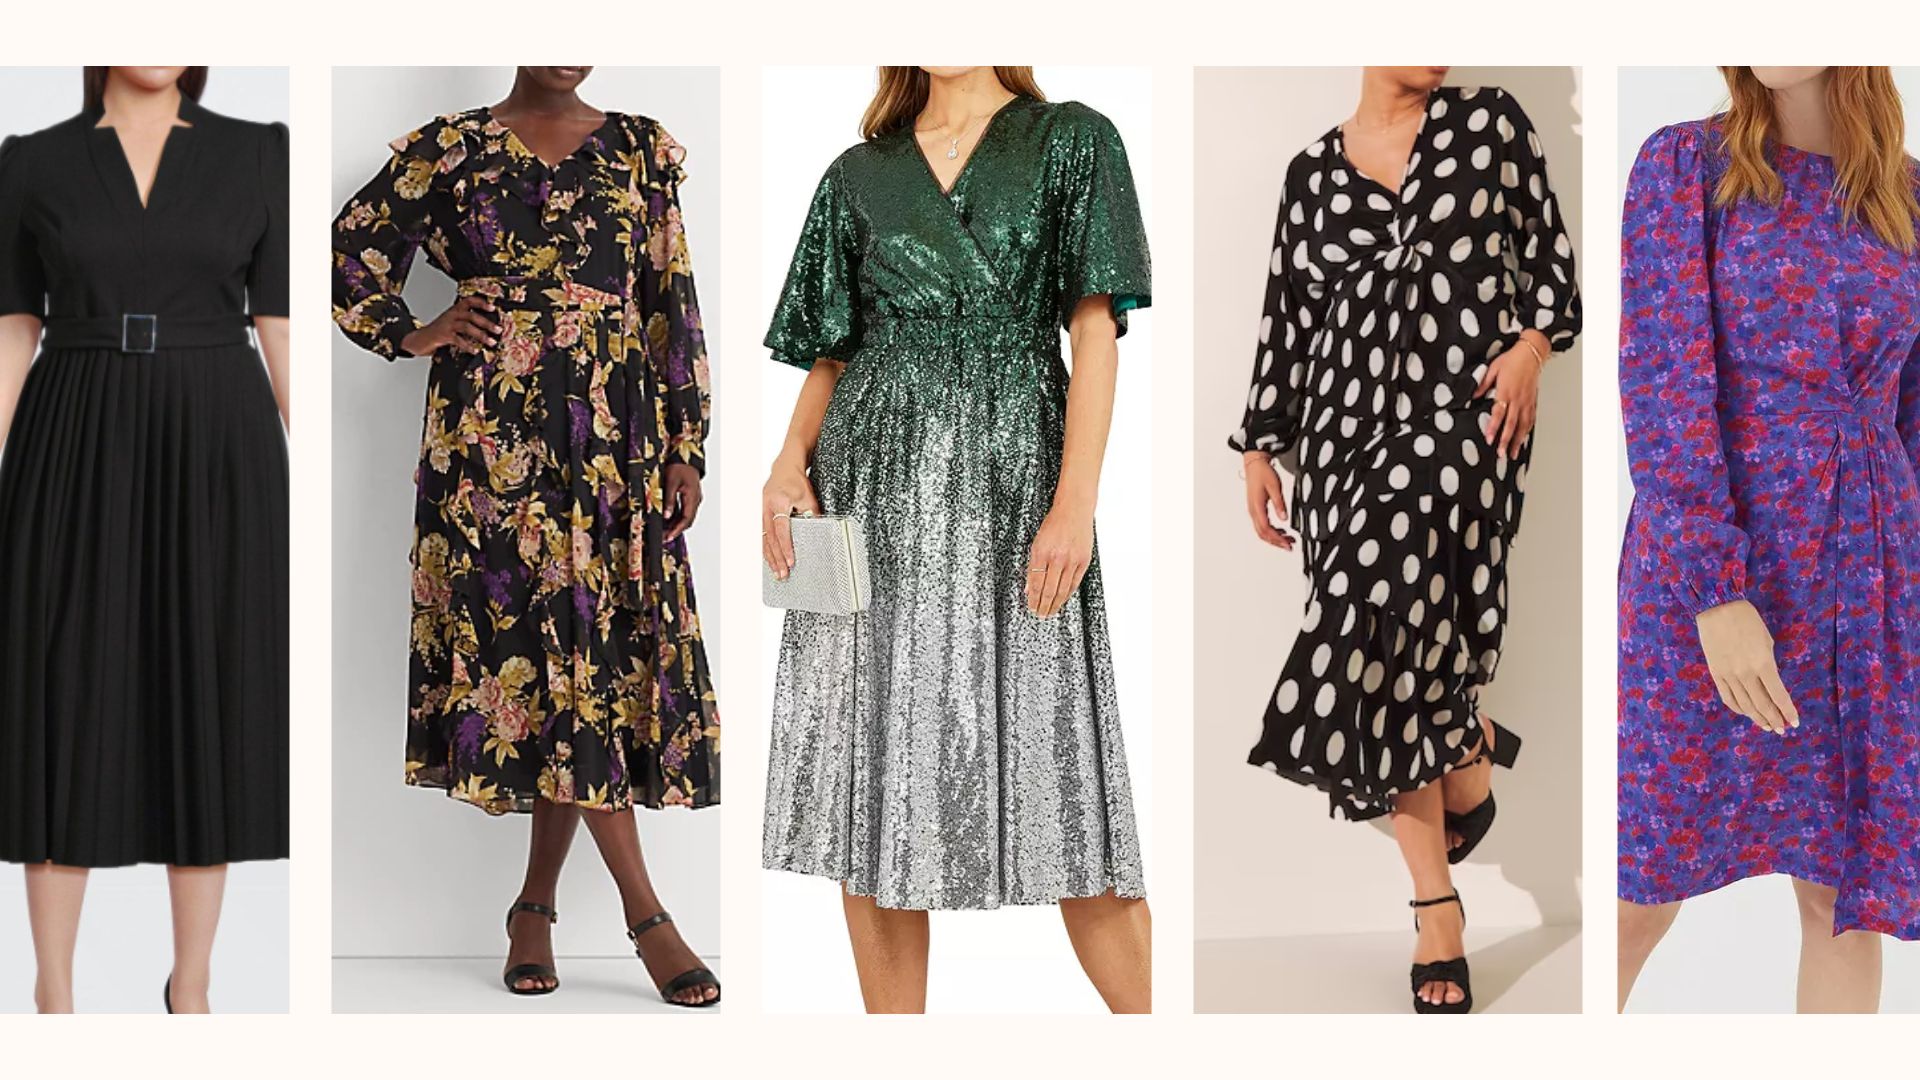 Stylish dresses to hide a tummy - plus tips from the experts